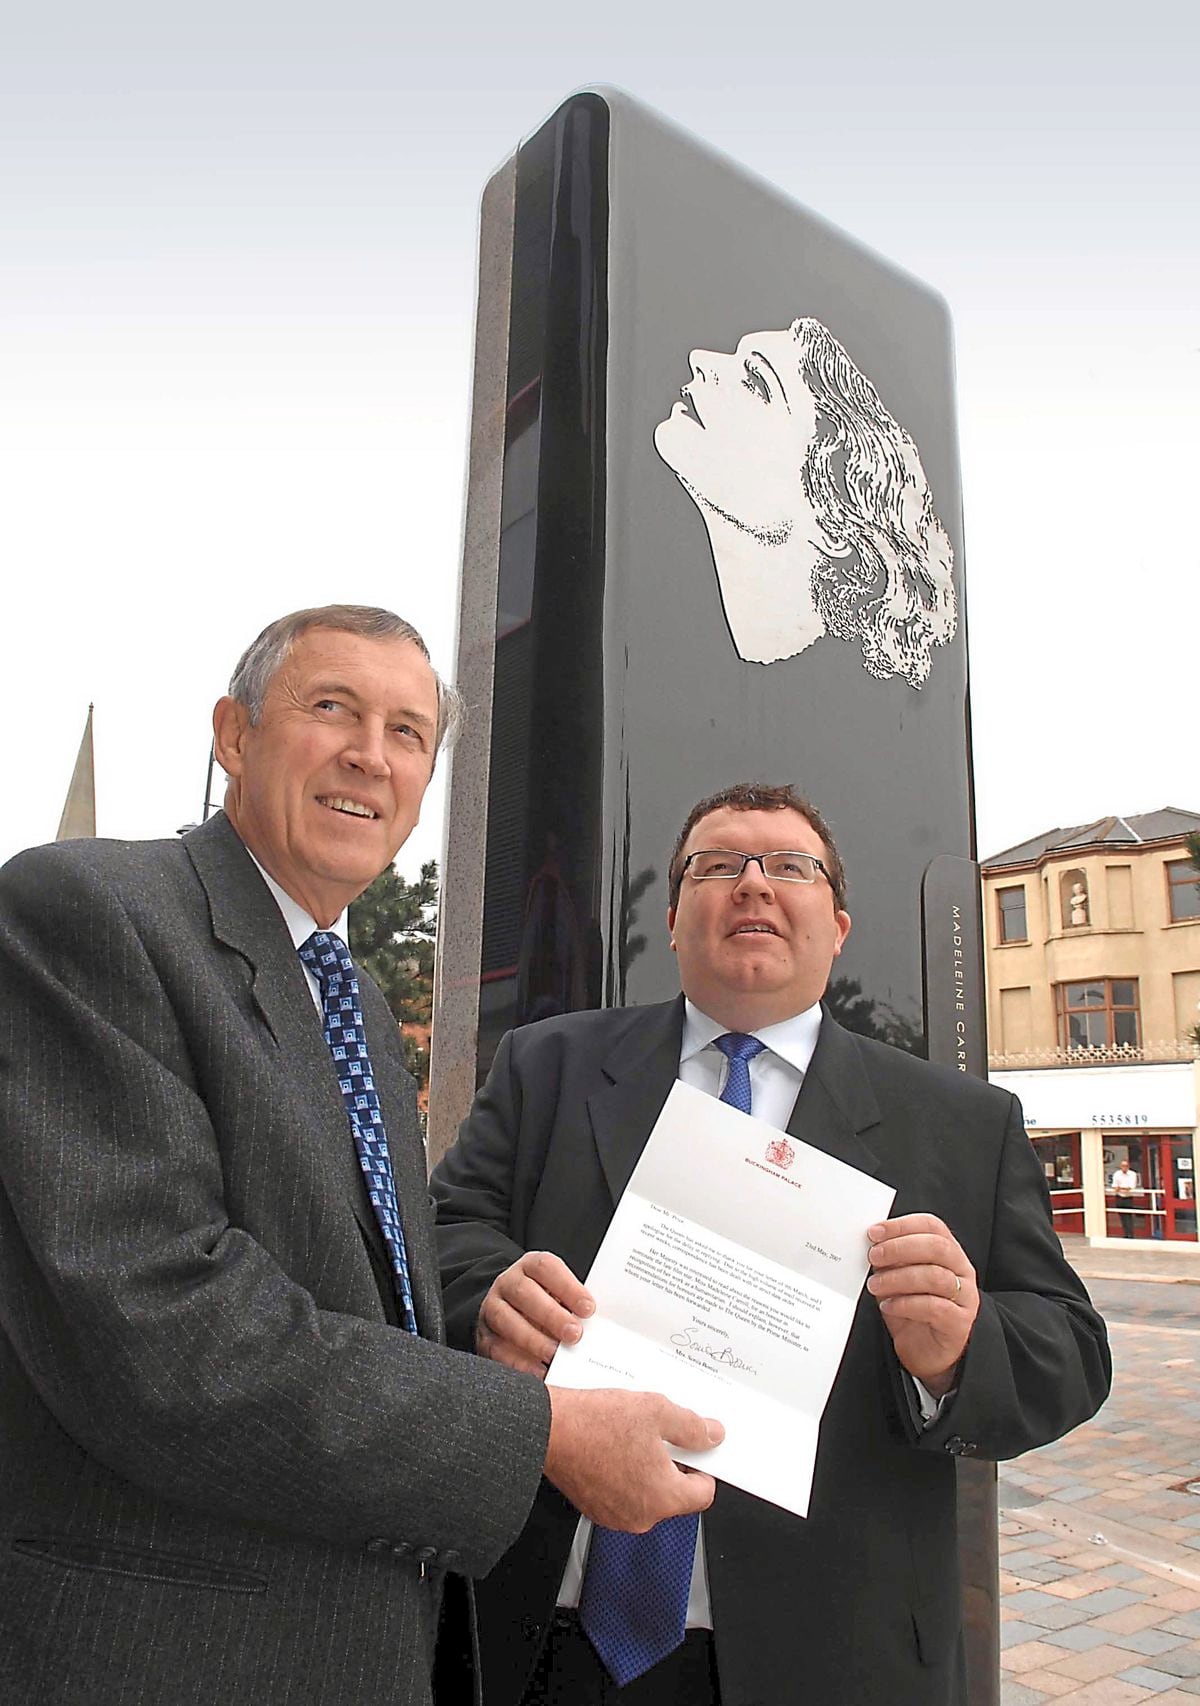 Historian Terry Price and former MP Tom Watson at the monument to Madeleine Carroll in West Bromwich town centre